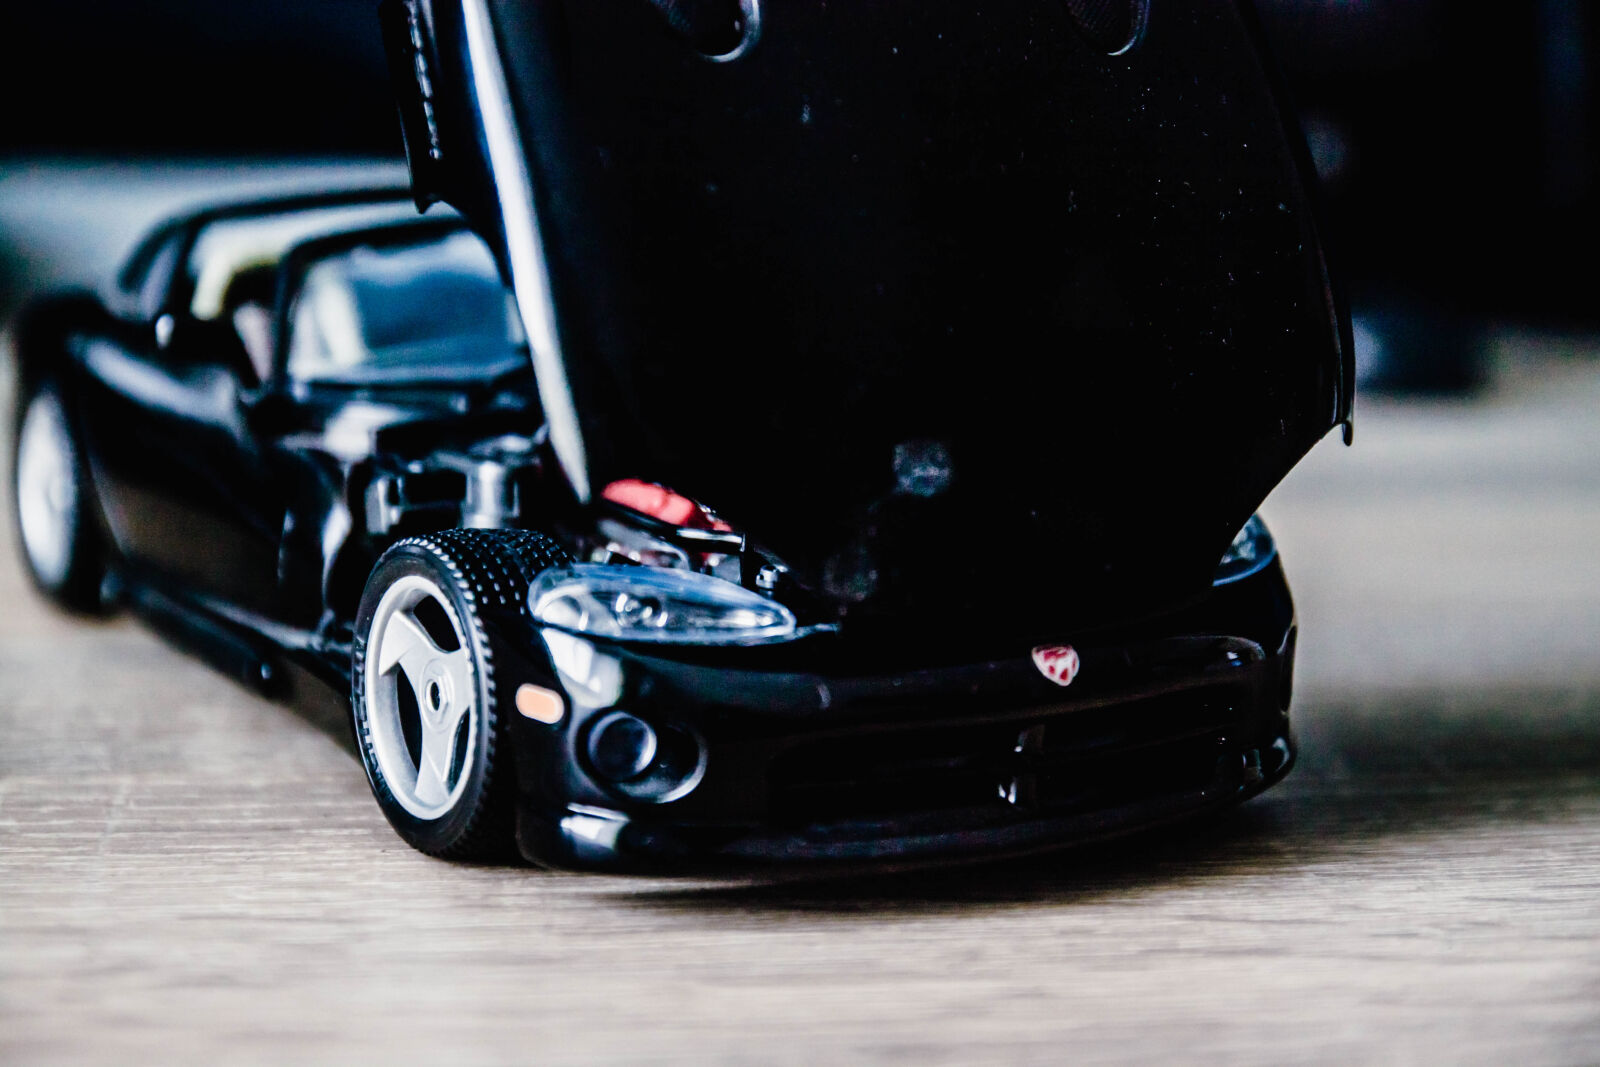 Tamron SP AF 17-50mm F2.8 XR Di II VC LD Aspherical (IF) sample photo. Dodge viper toy car #2 photography